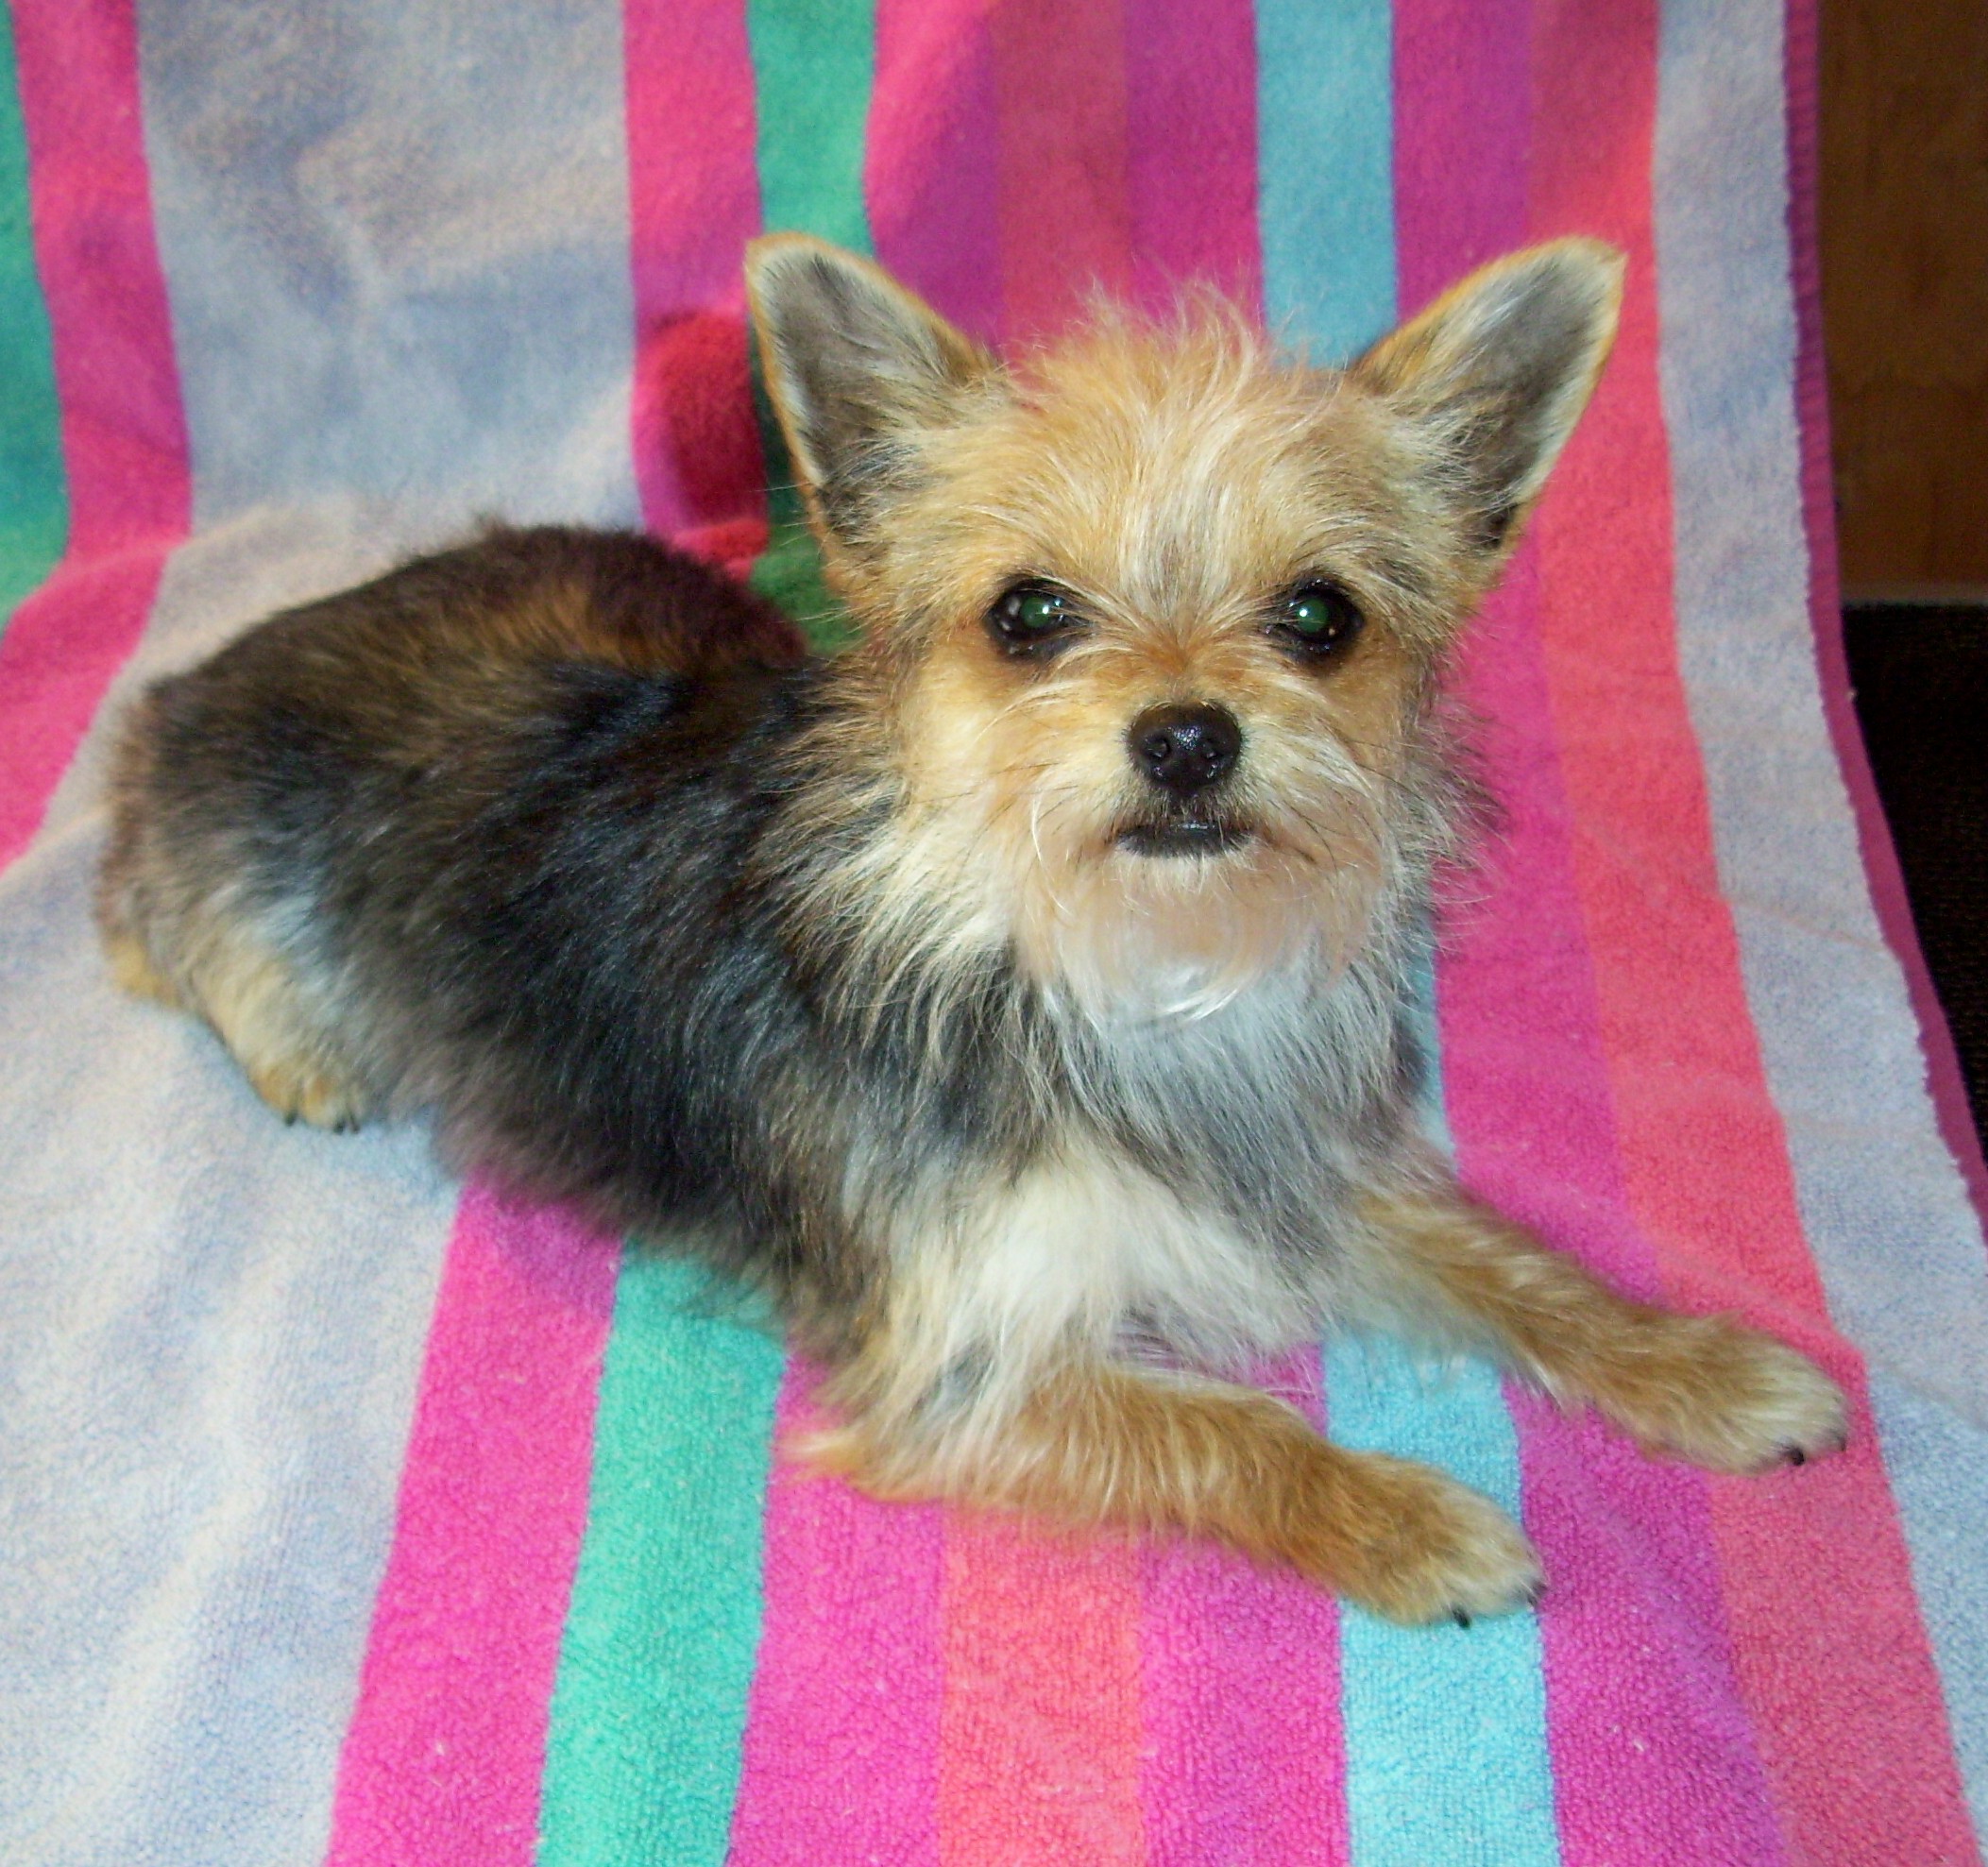 Chorkie (Chihuahua Yorkie Mix) breed review and 13